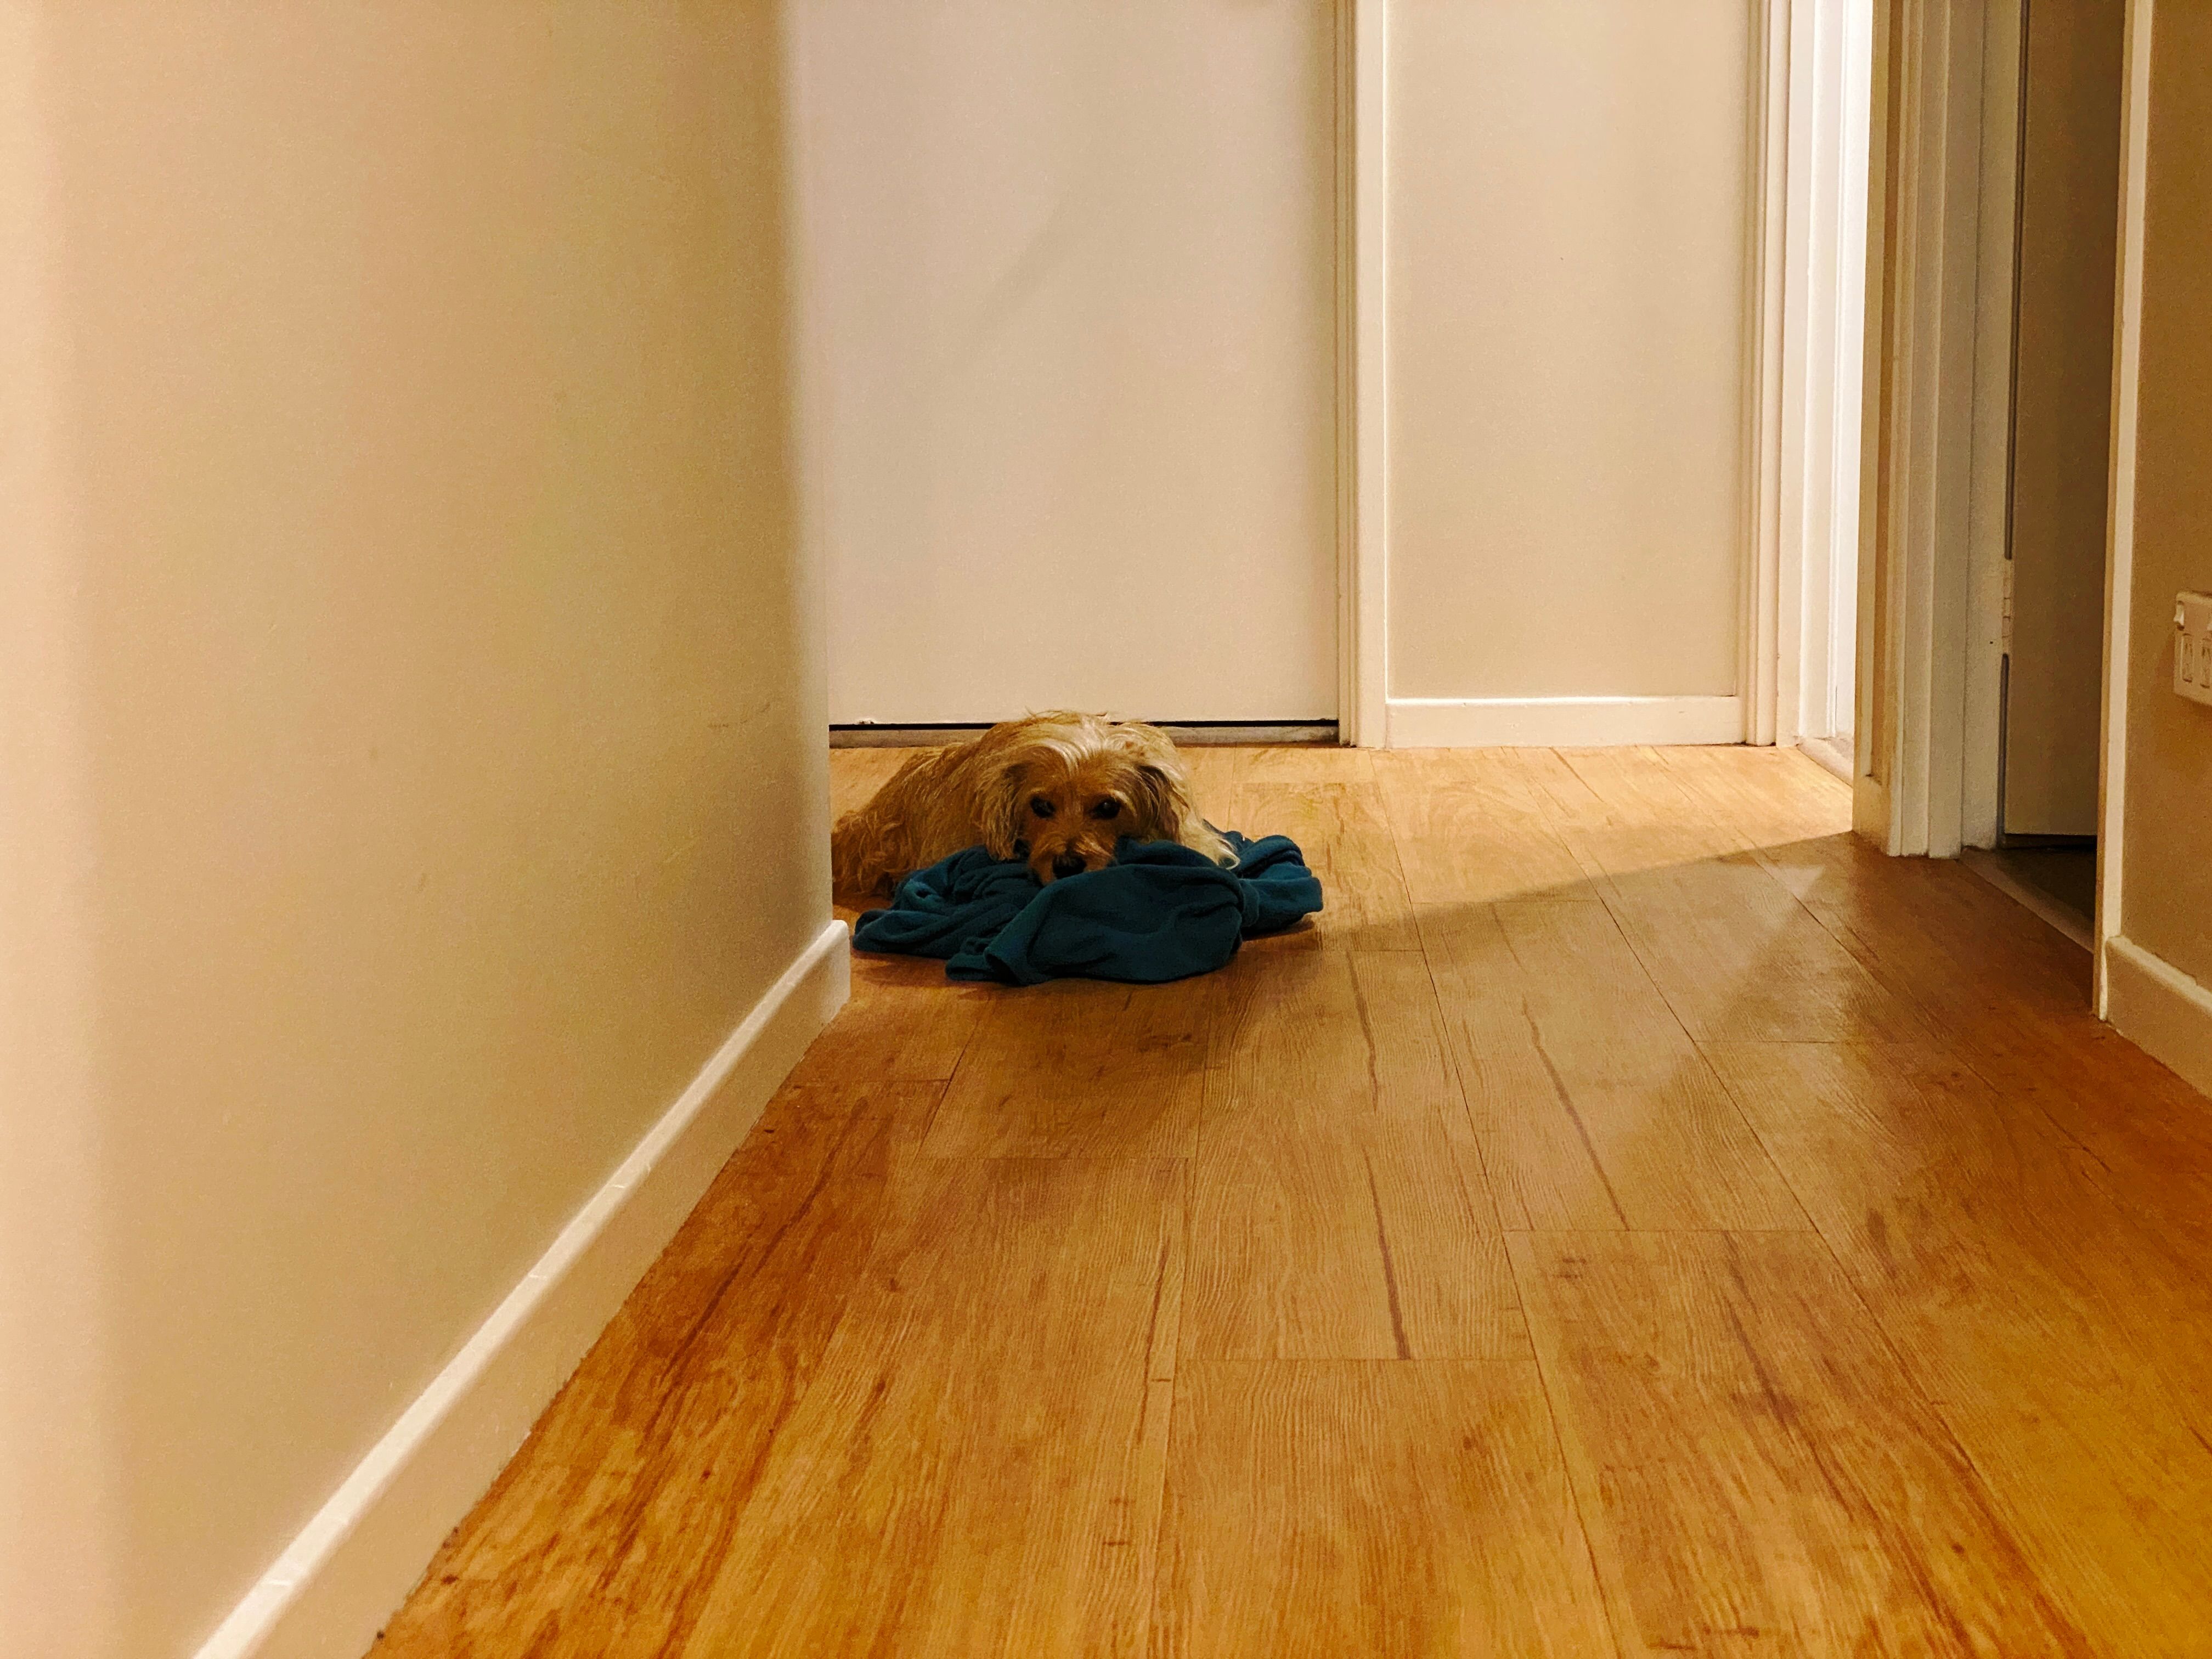 A photo looking down a hallway of a small scruffy blonde dog lying on a green blanket, staring directly at the camera.